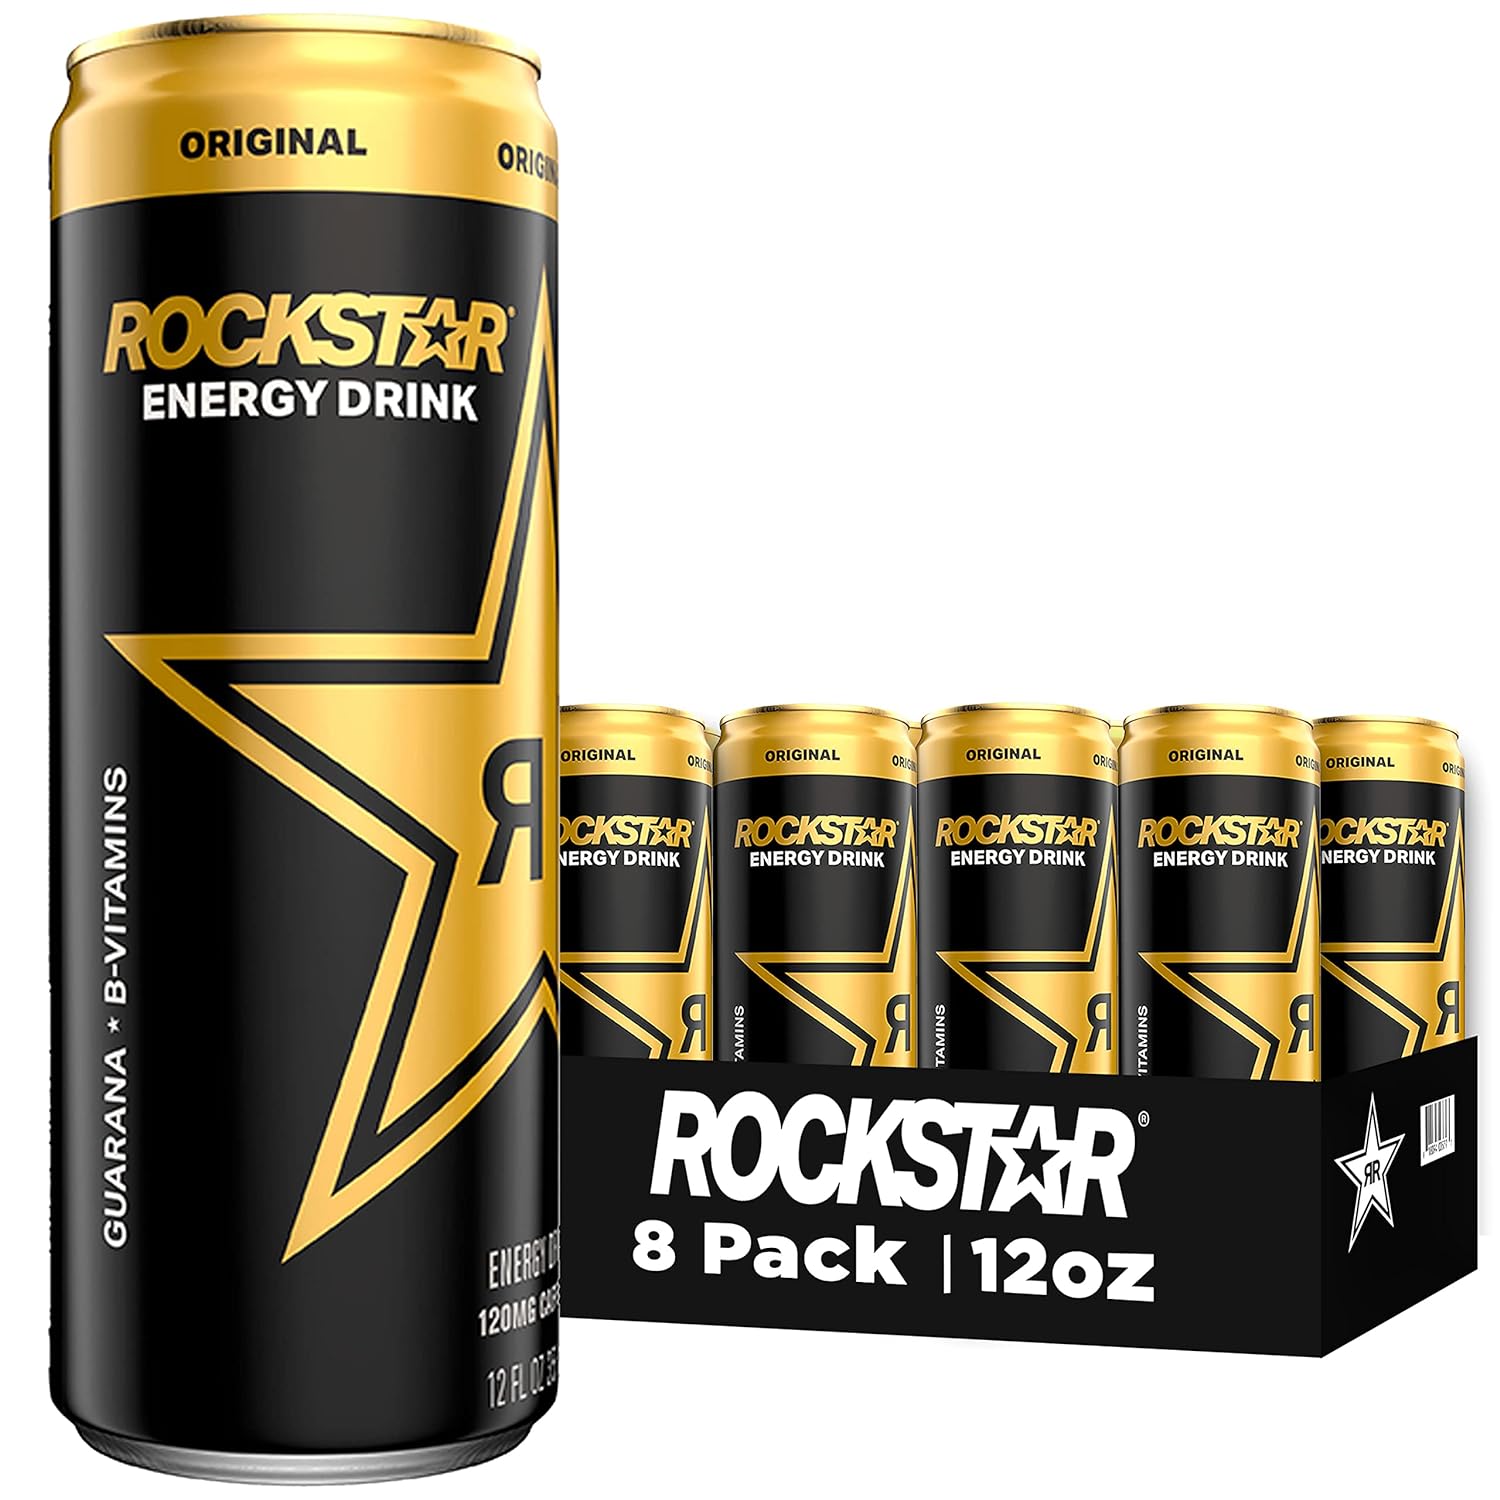 8-Pack 12-Oz Rockstar Energy Drink Cans (Original) $8.94 w/ S&S + Free Shipping w/ Prime or on $35+